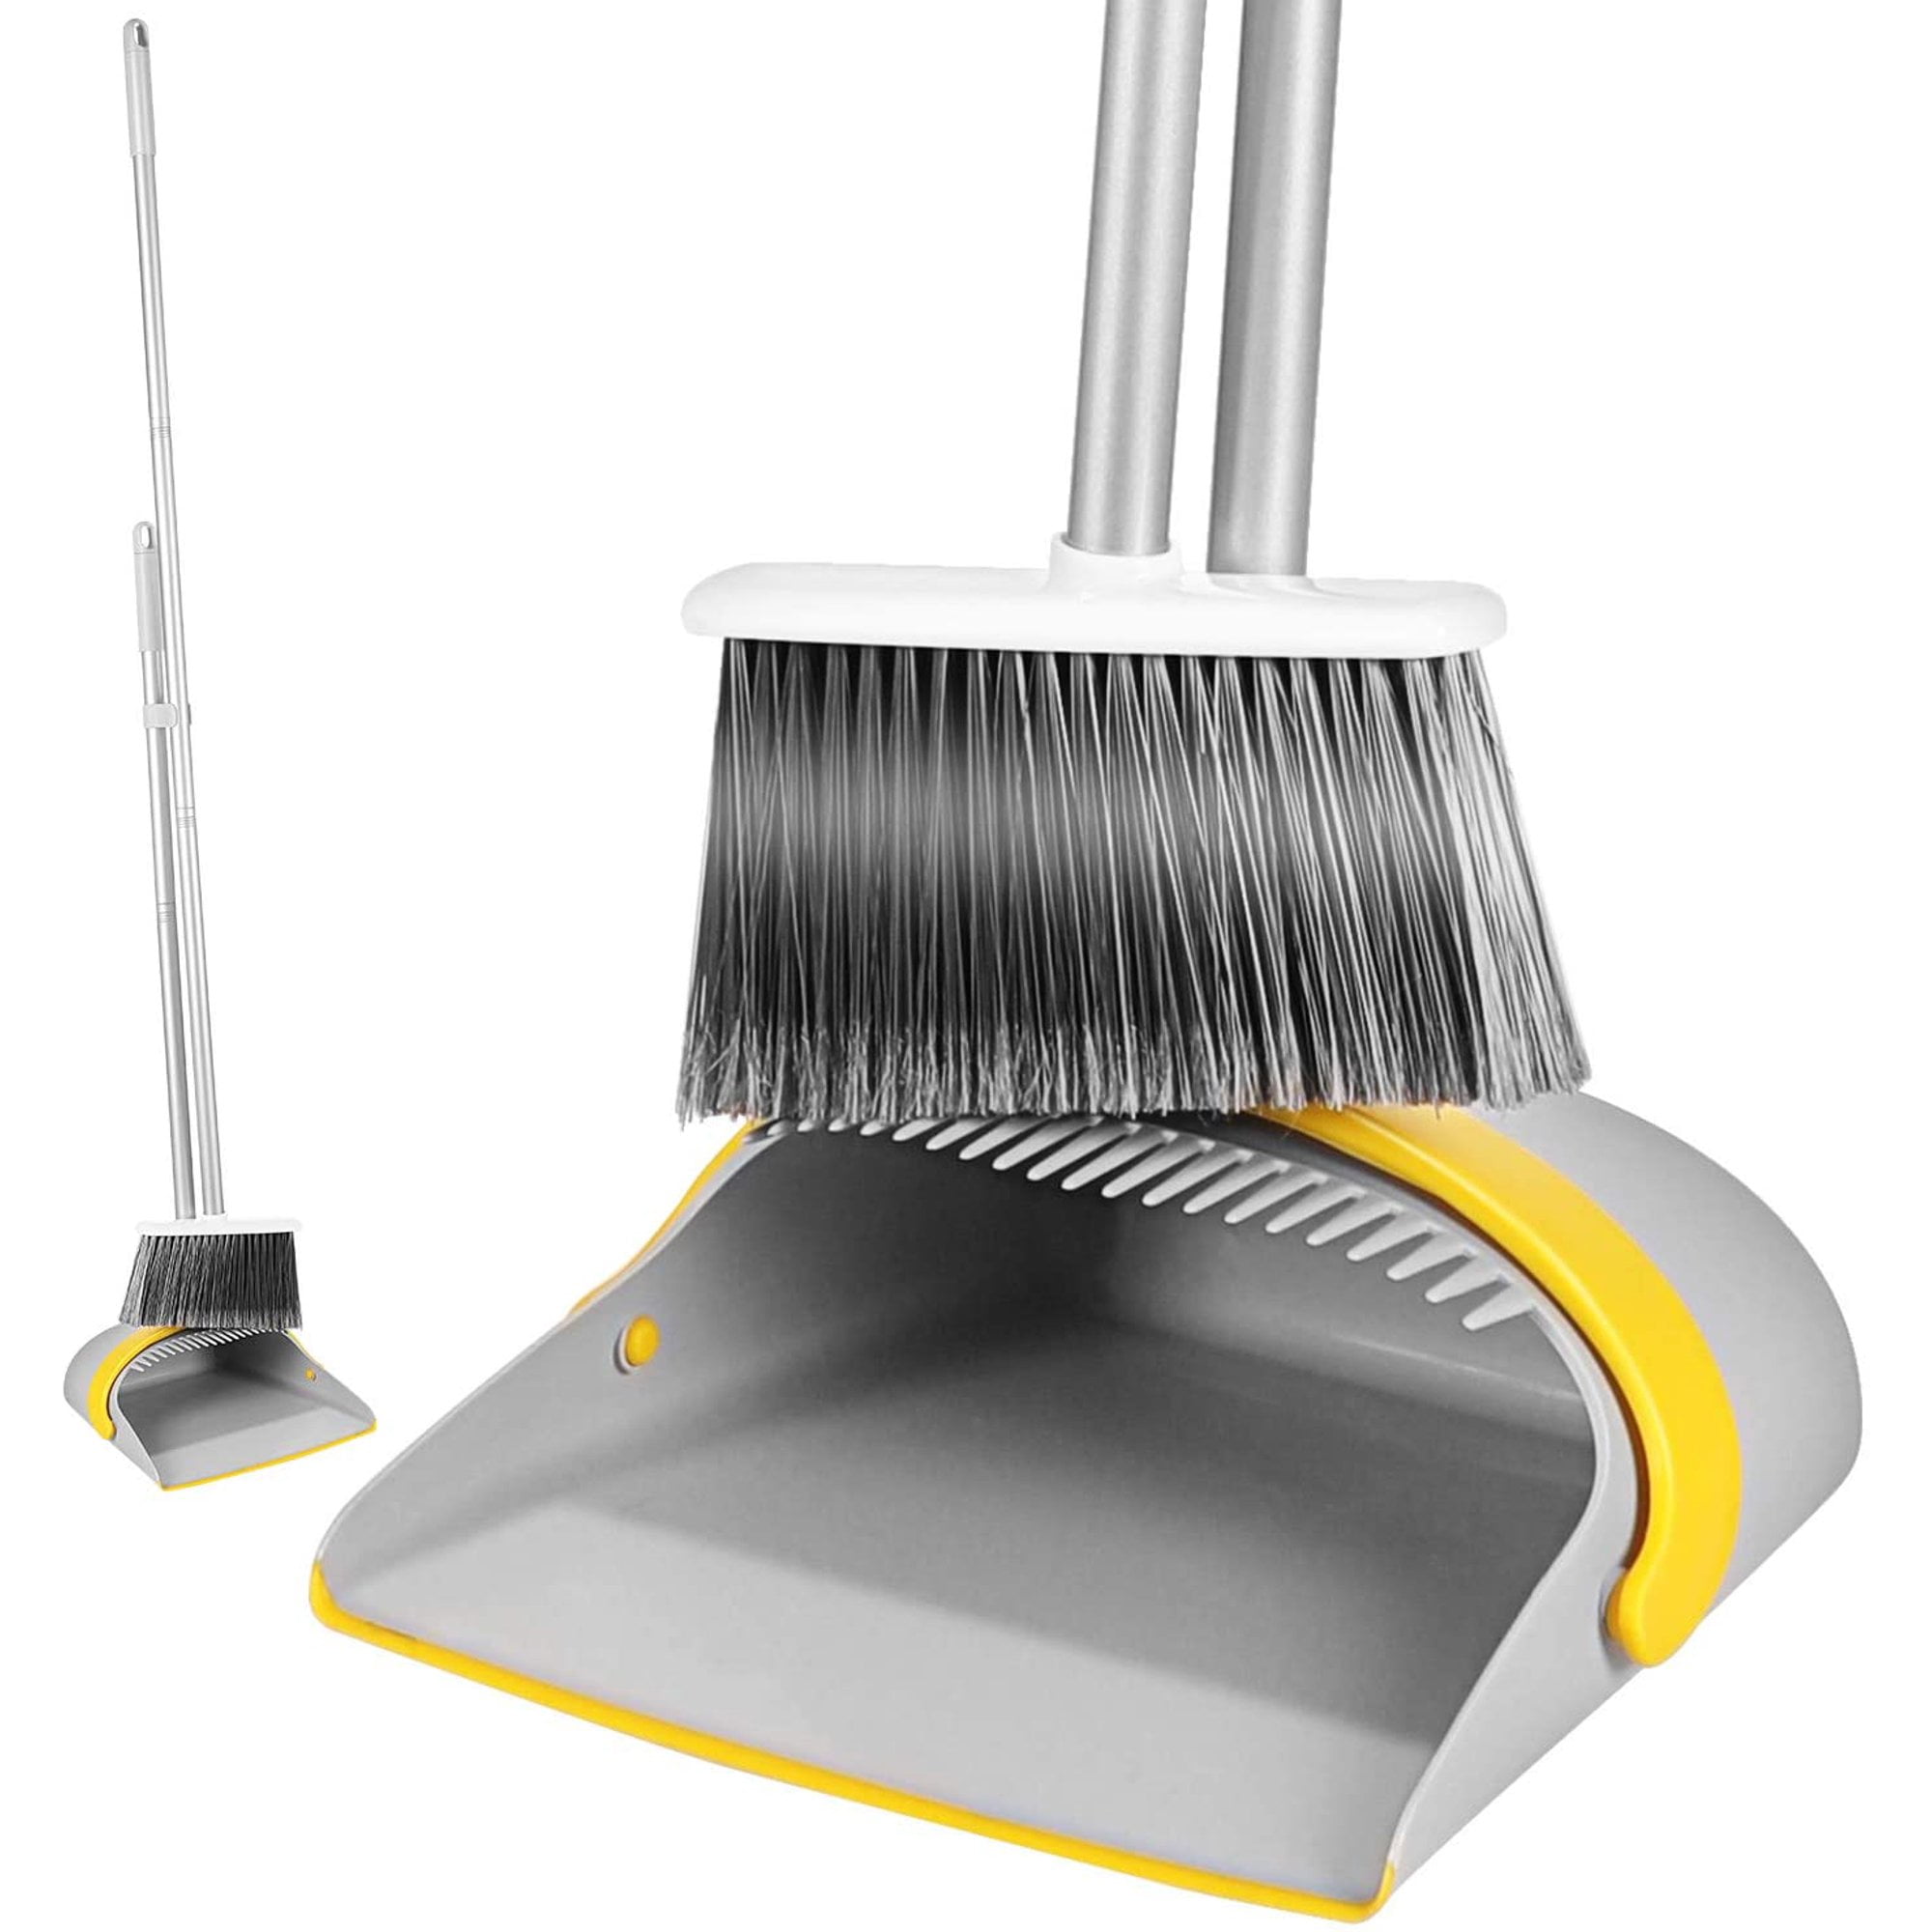 Heavy Duty Foldable Long Handle Broom Brush and Dustpan Was £29.99 